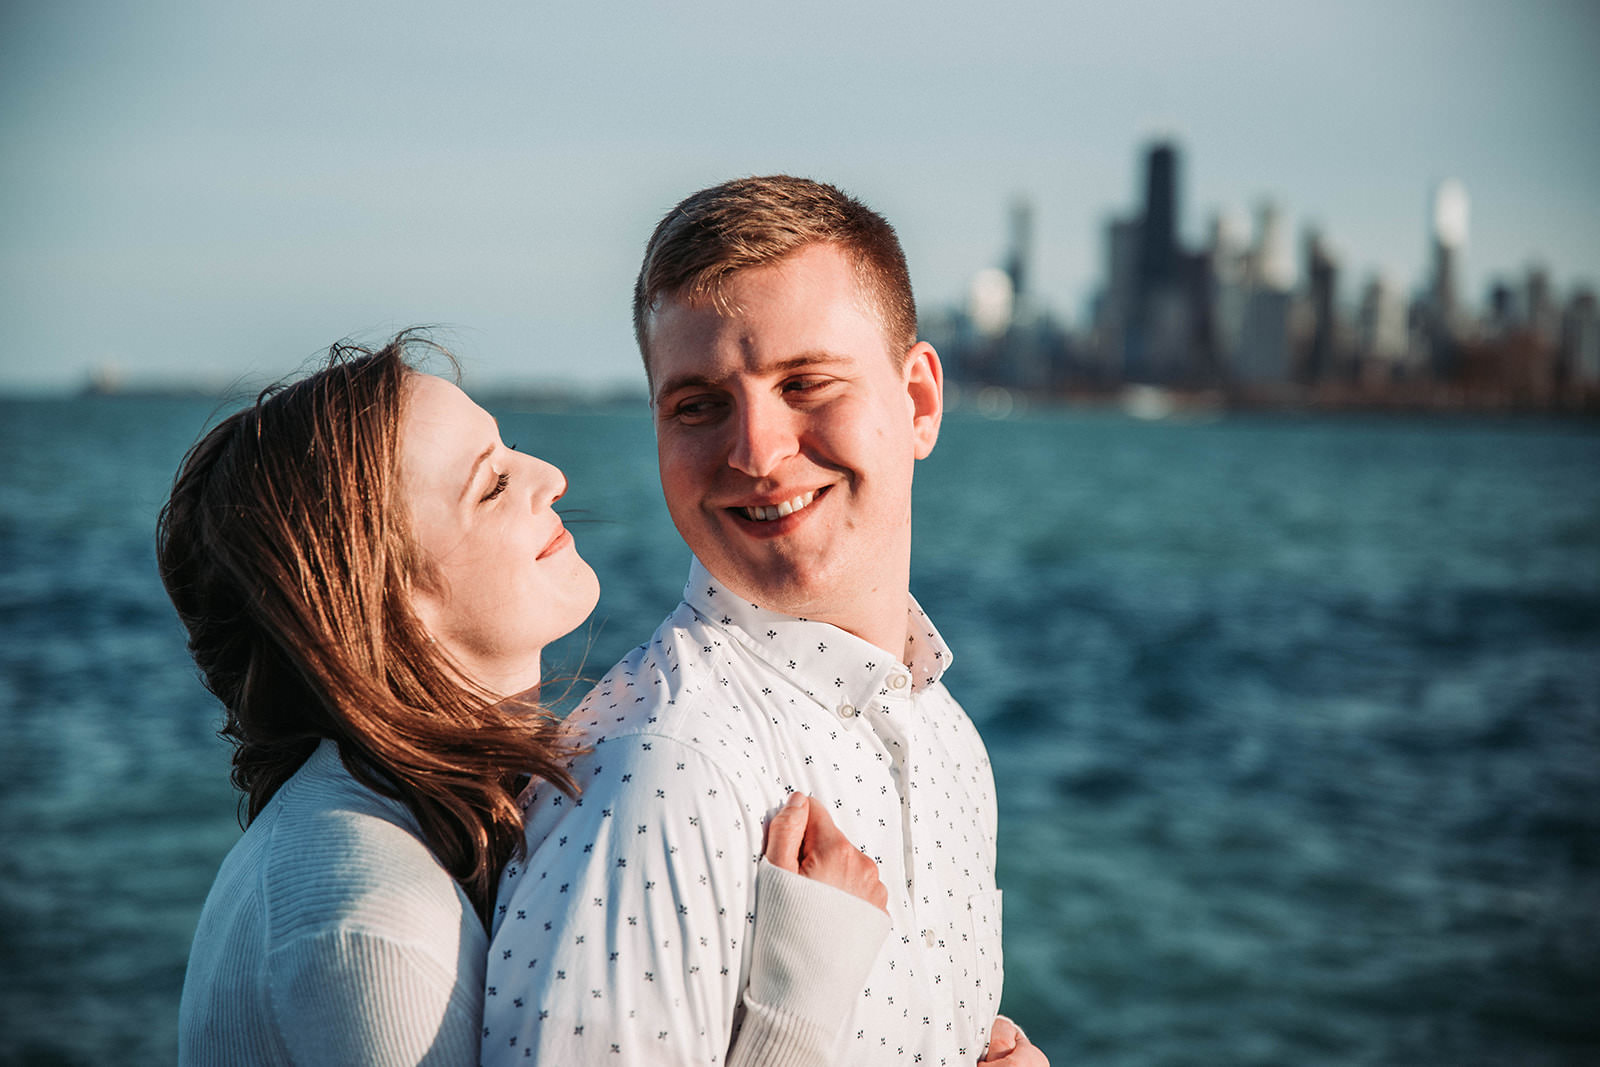 Downtown_chicago_spring_engagement_session-24.jpg